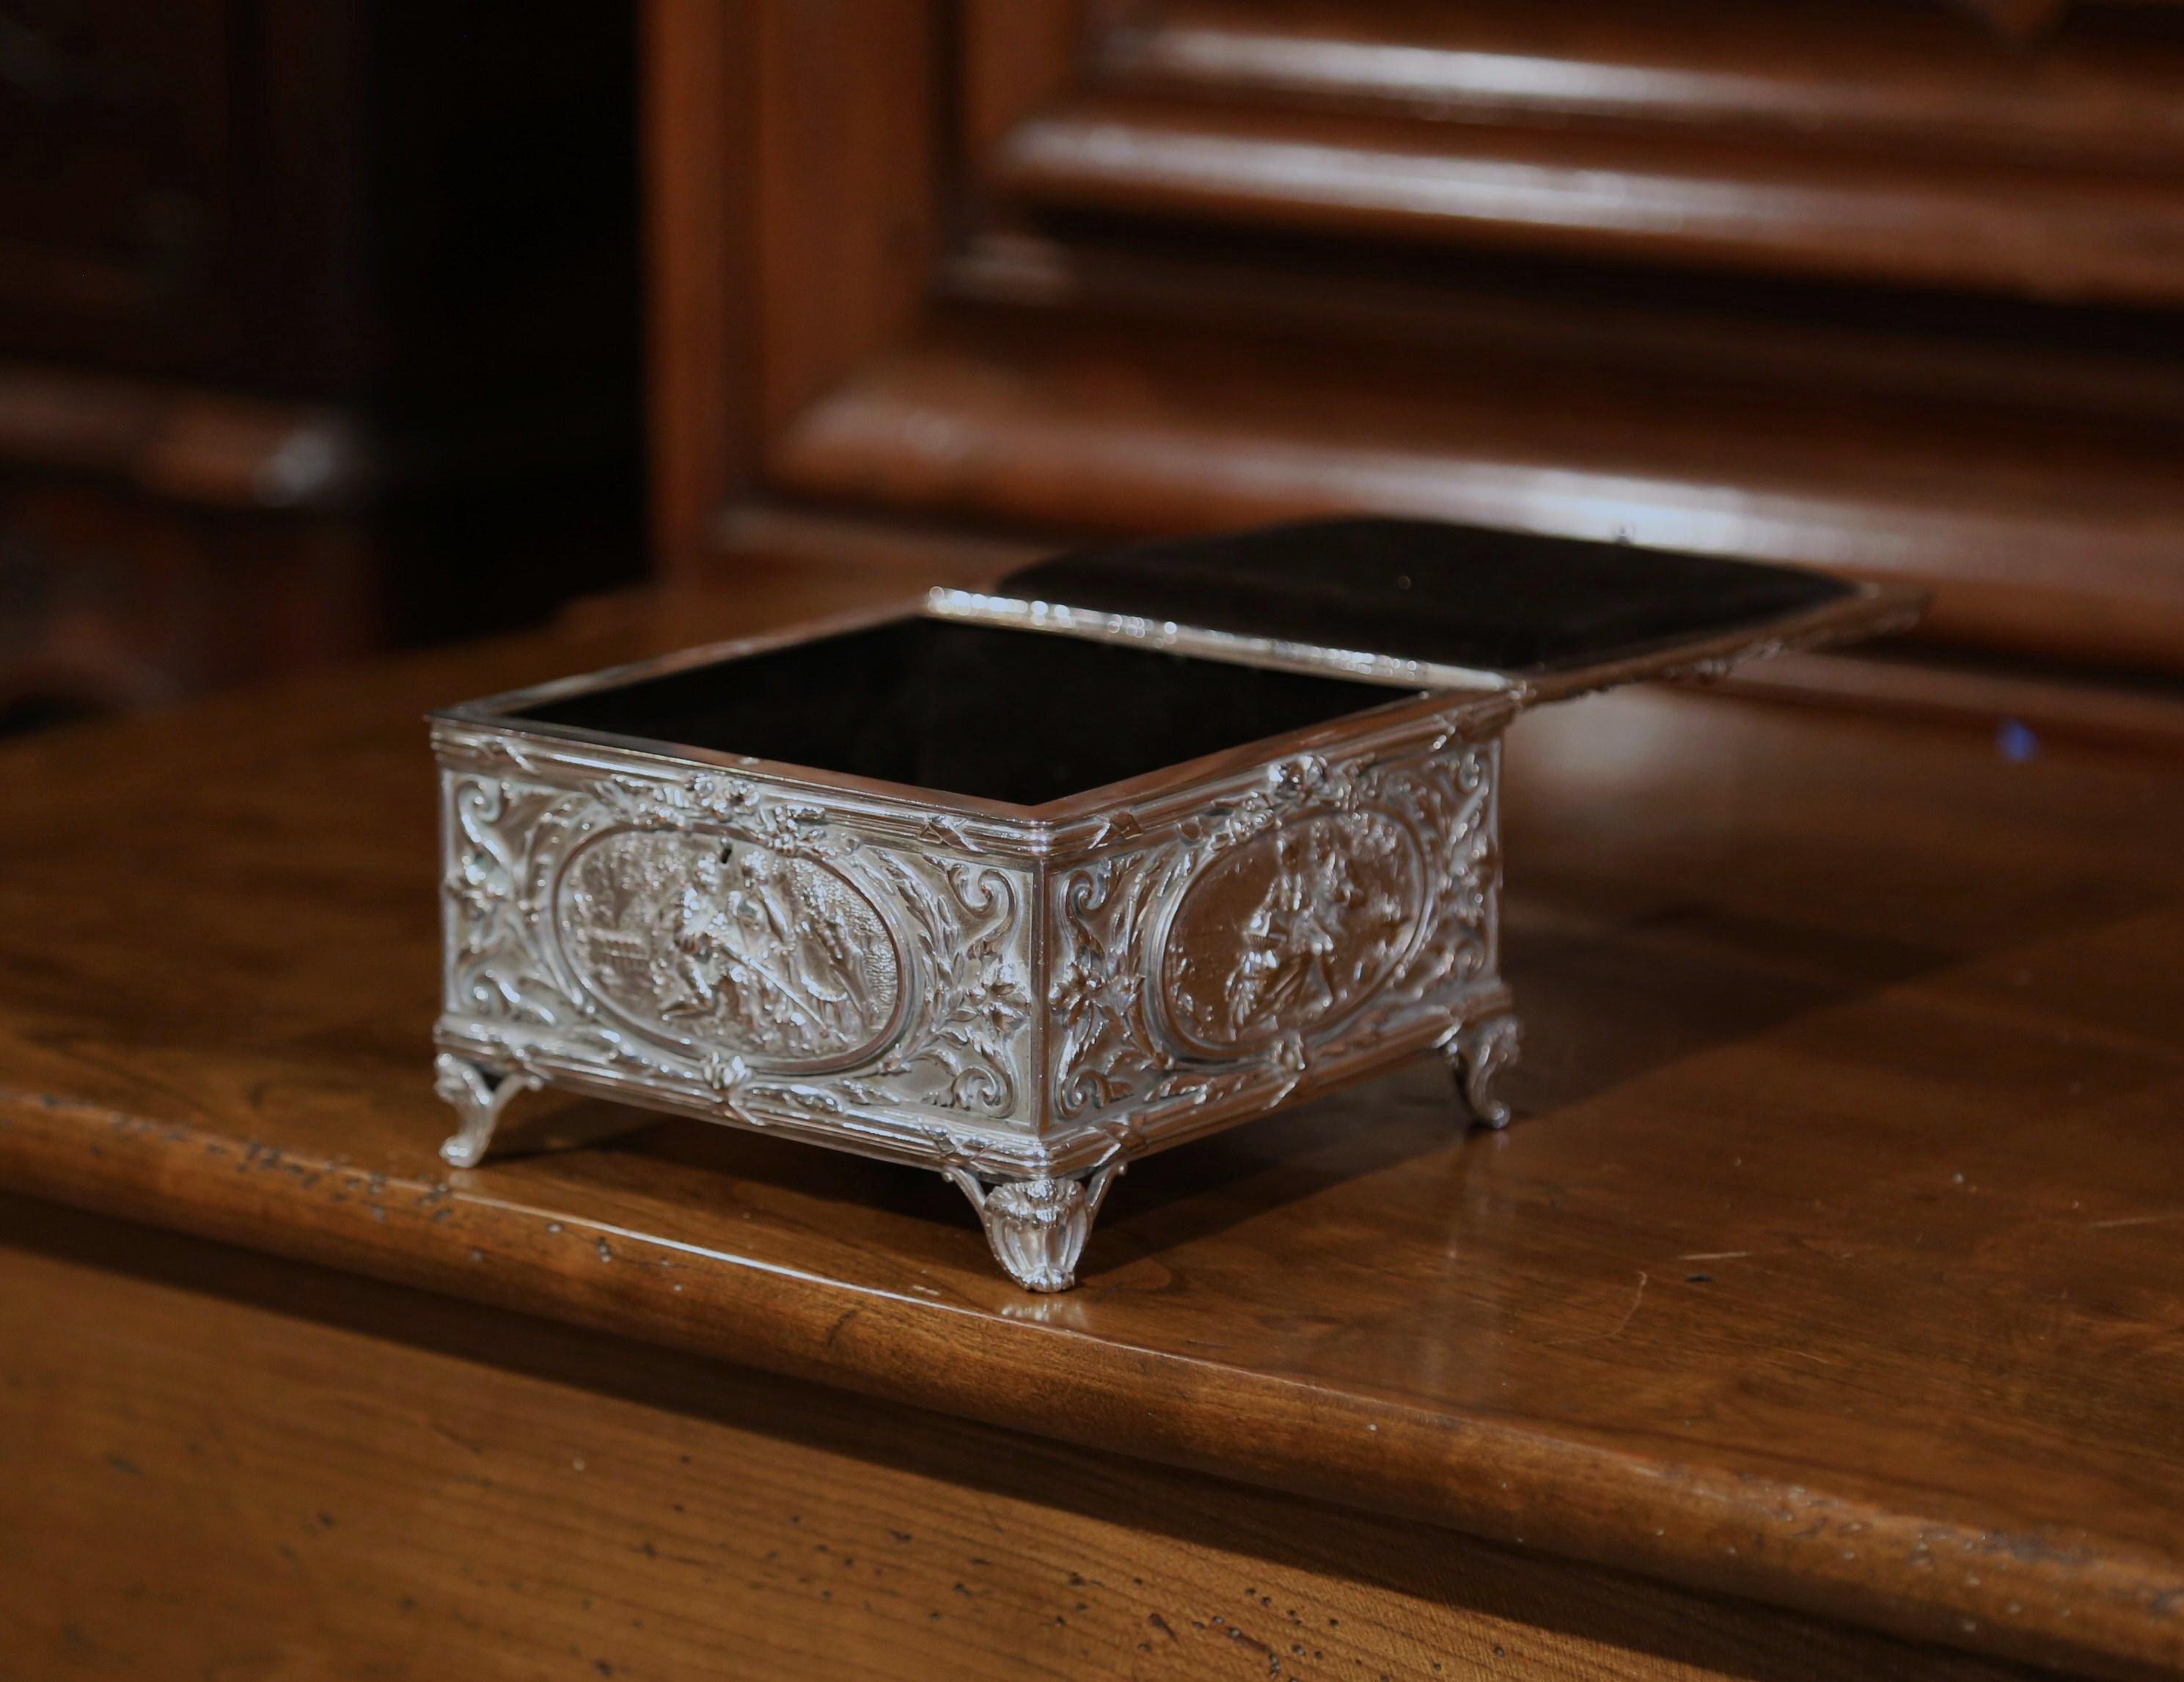 Hand-Crafted 19th Century French Louis XVI Silver on Copper Repoussé Jewelry Casket Box